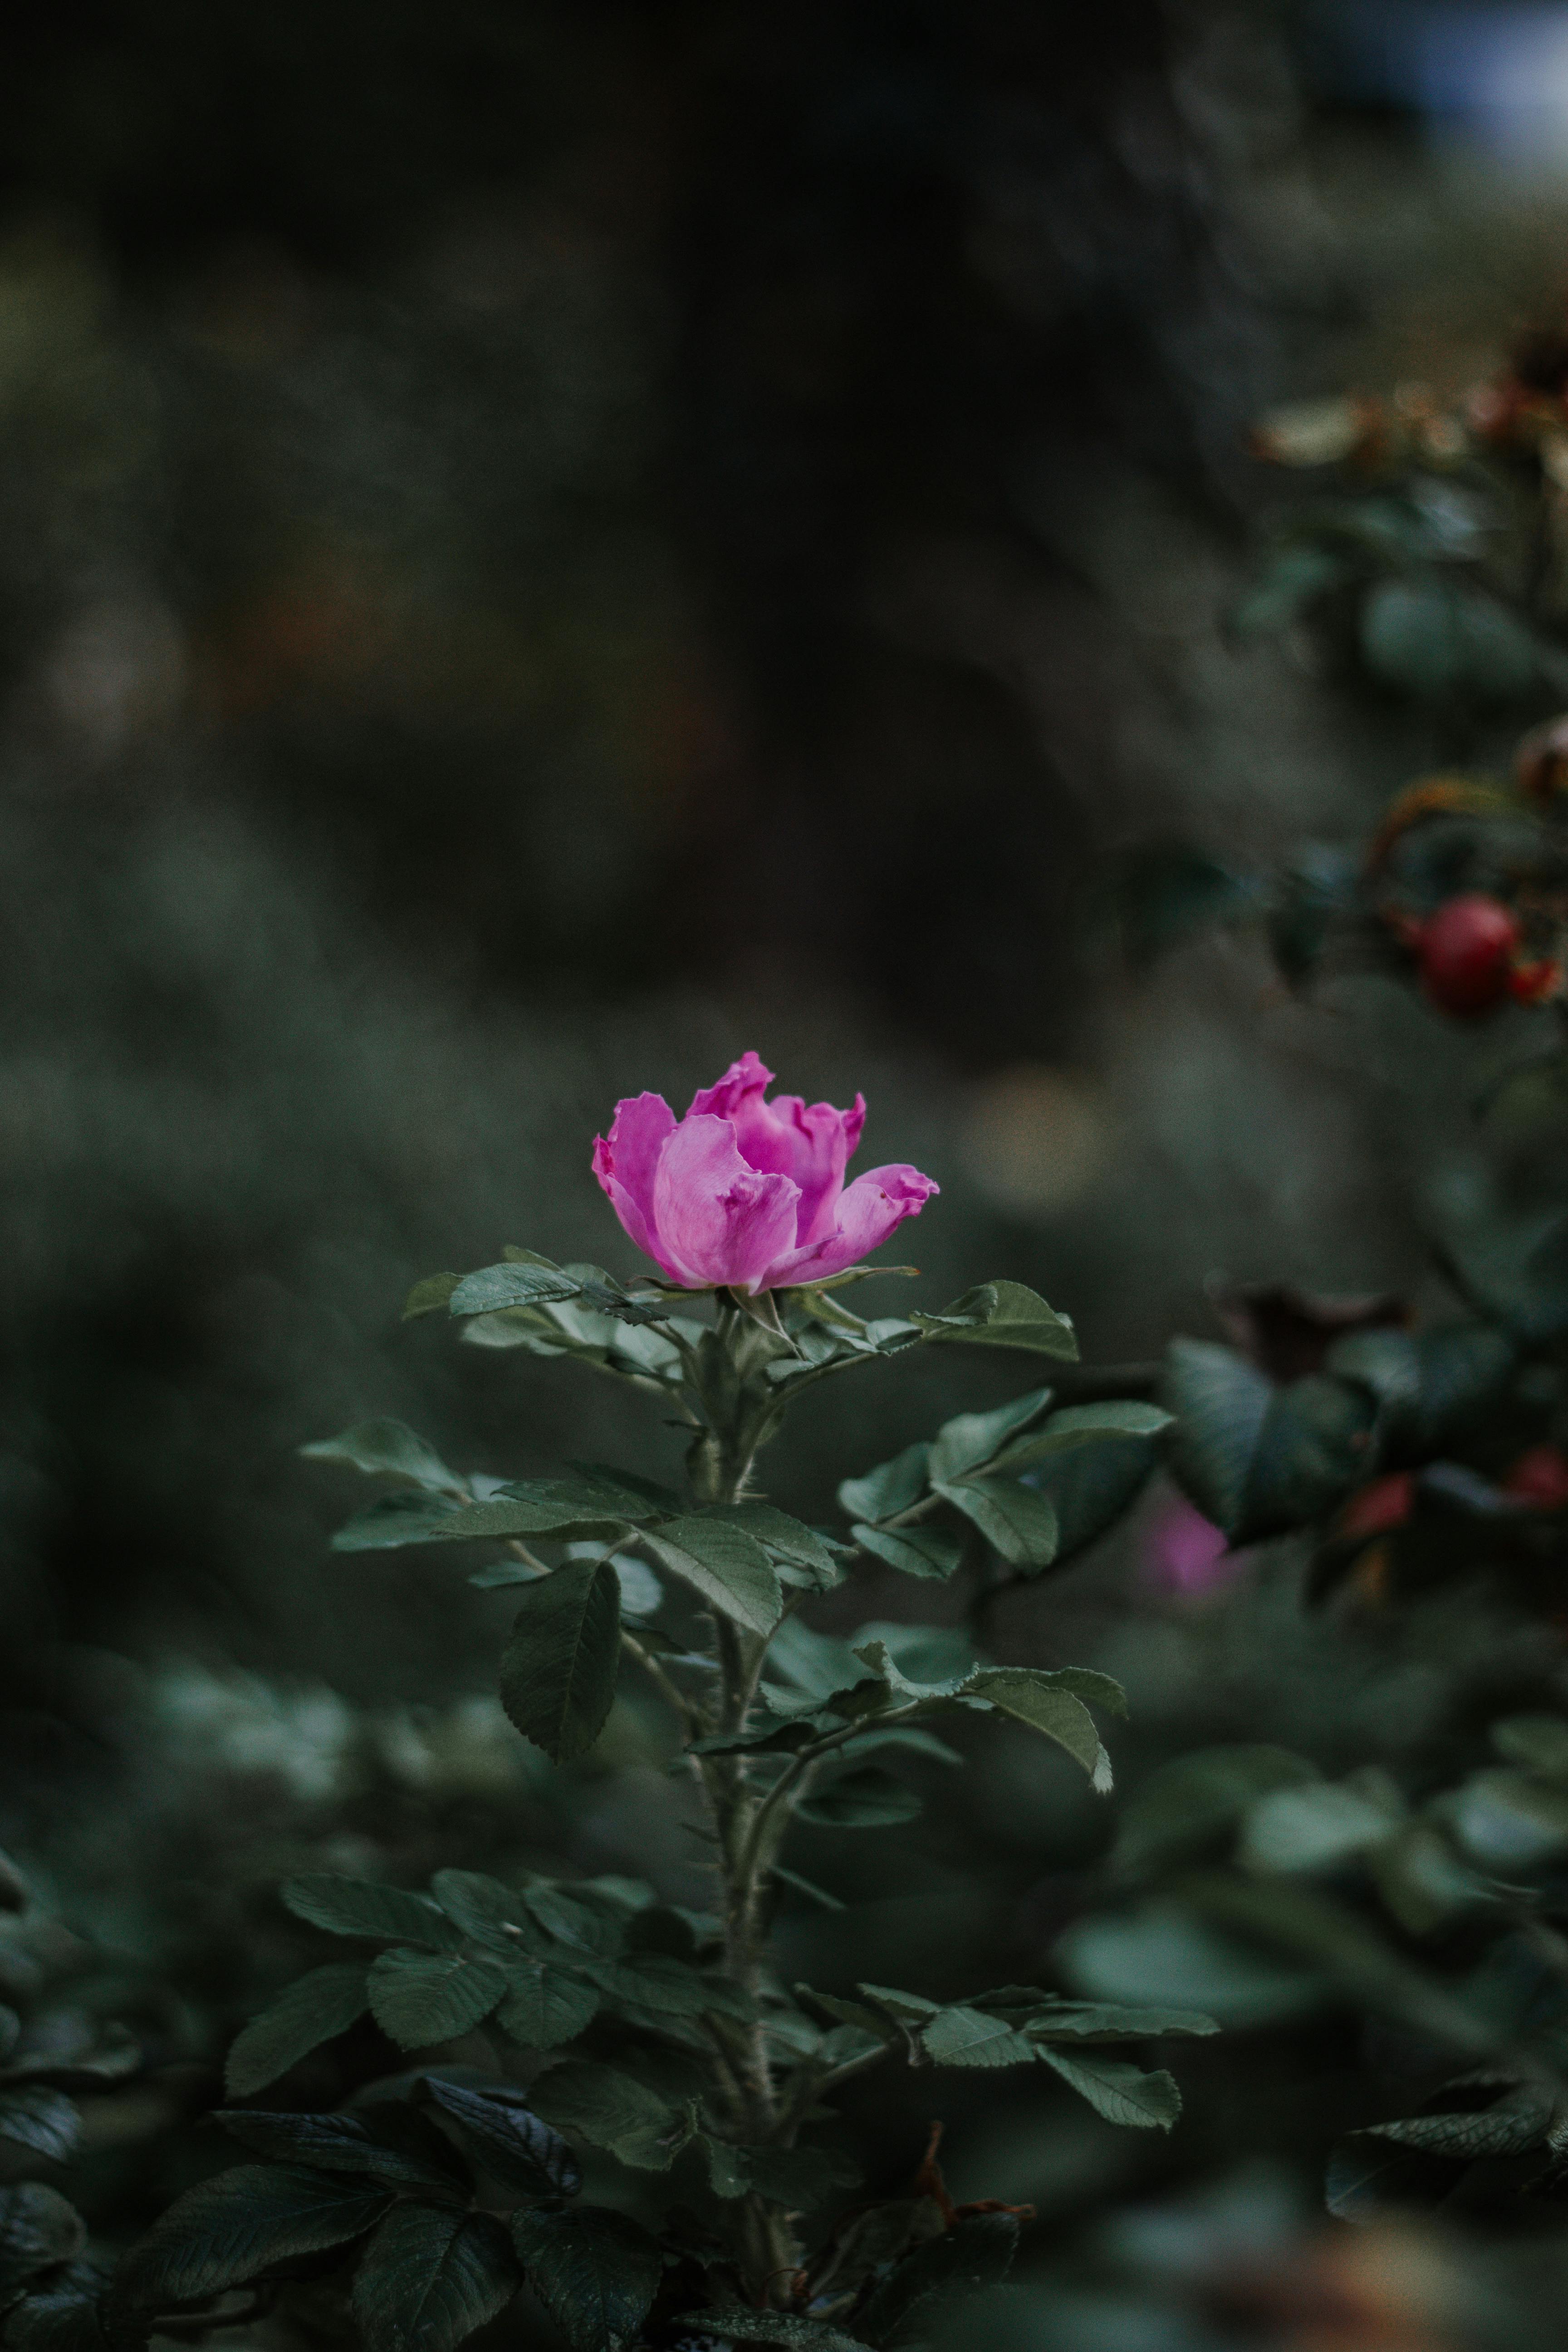 Dark Photo of a Pink Rose in a Garden · Free Stock Photo